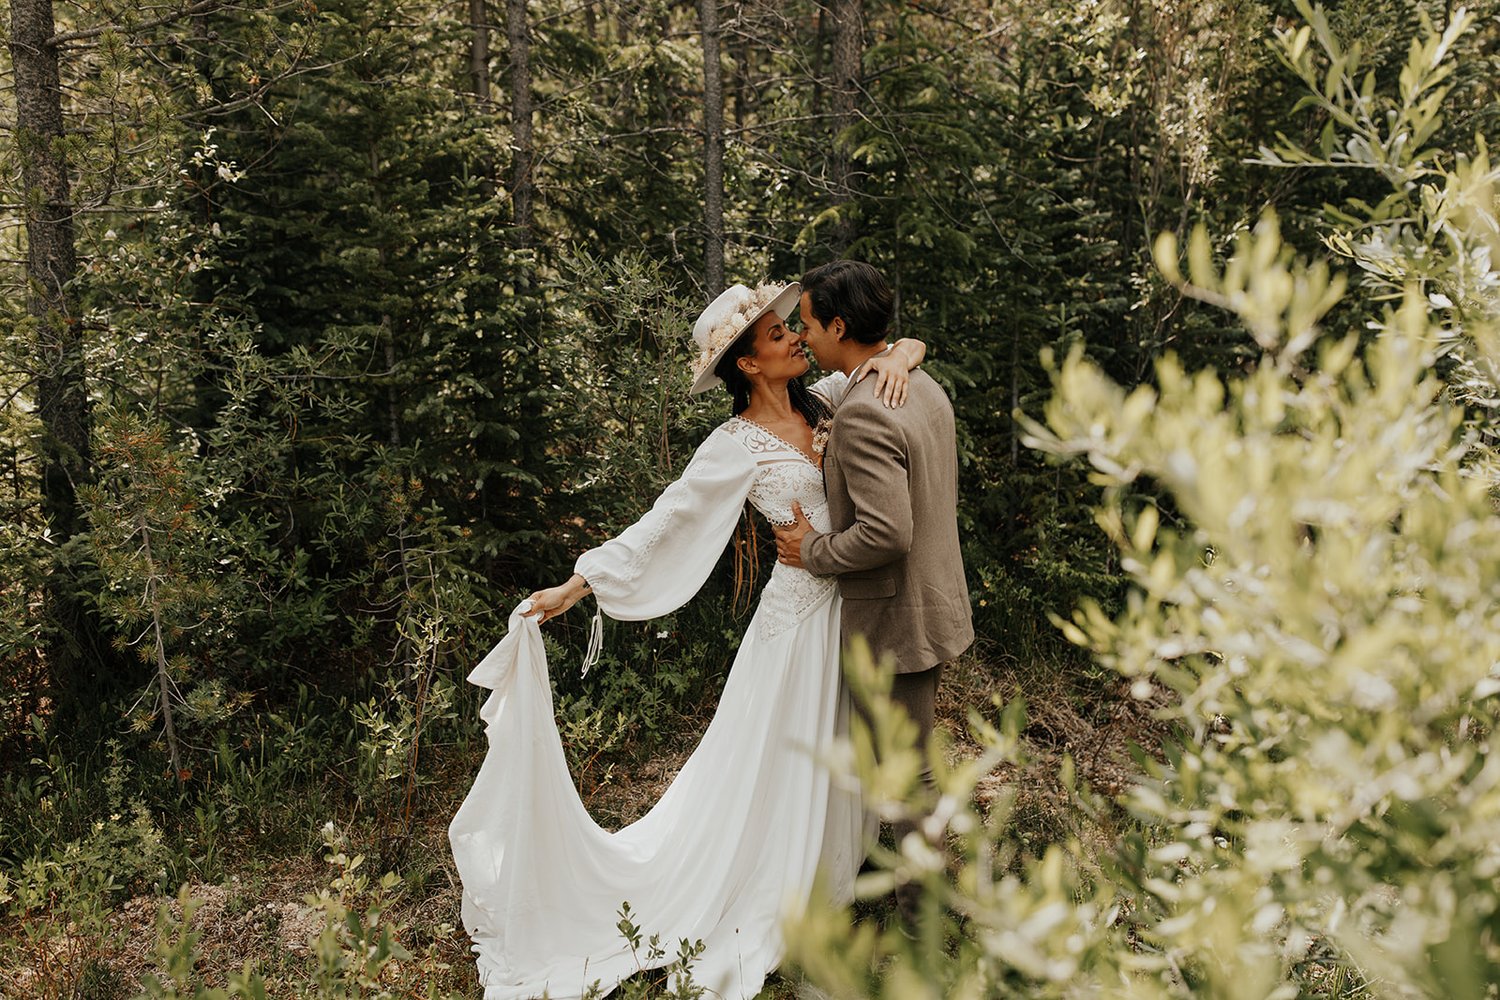 Elopement Wedding Dress For Your Outdoor Carefree Wedding